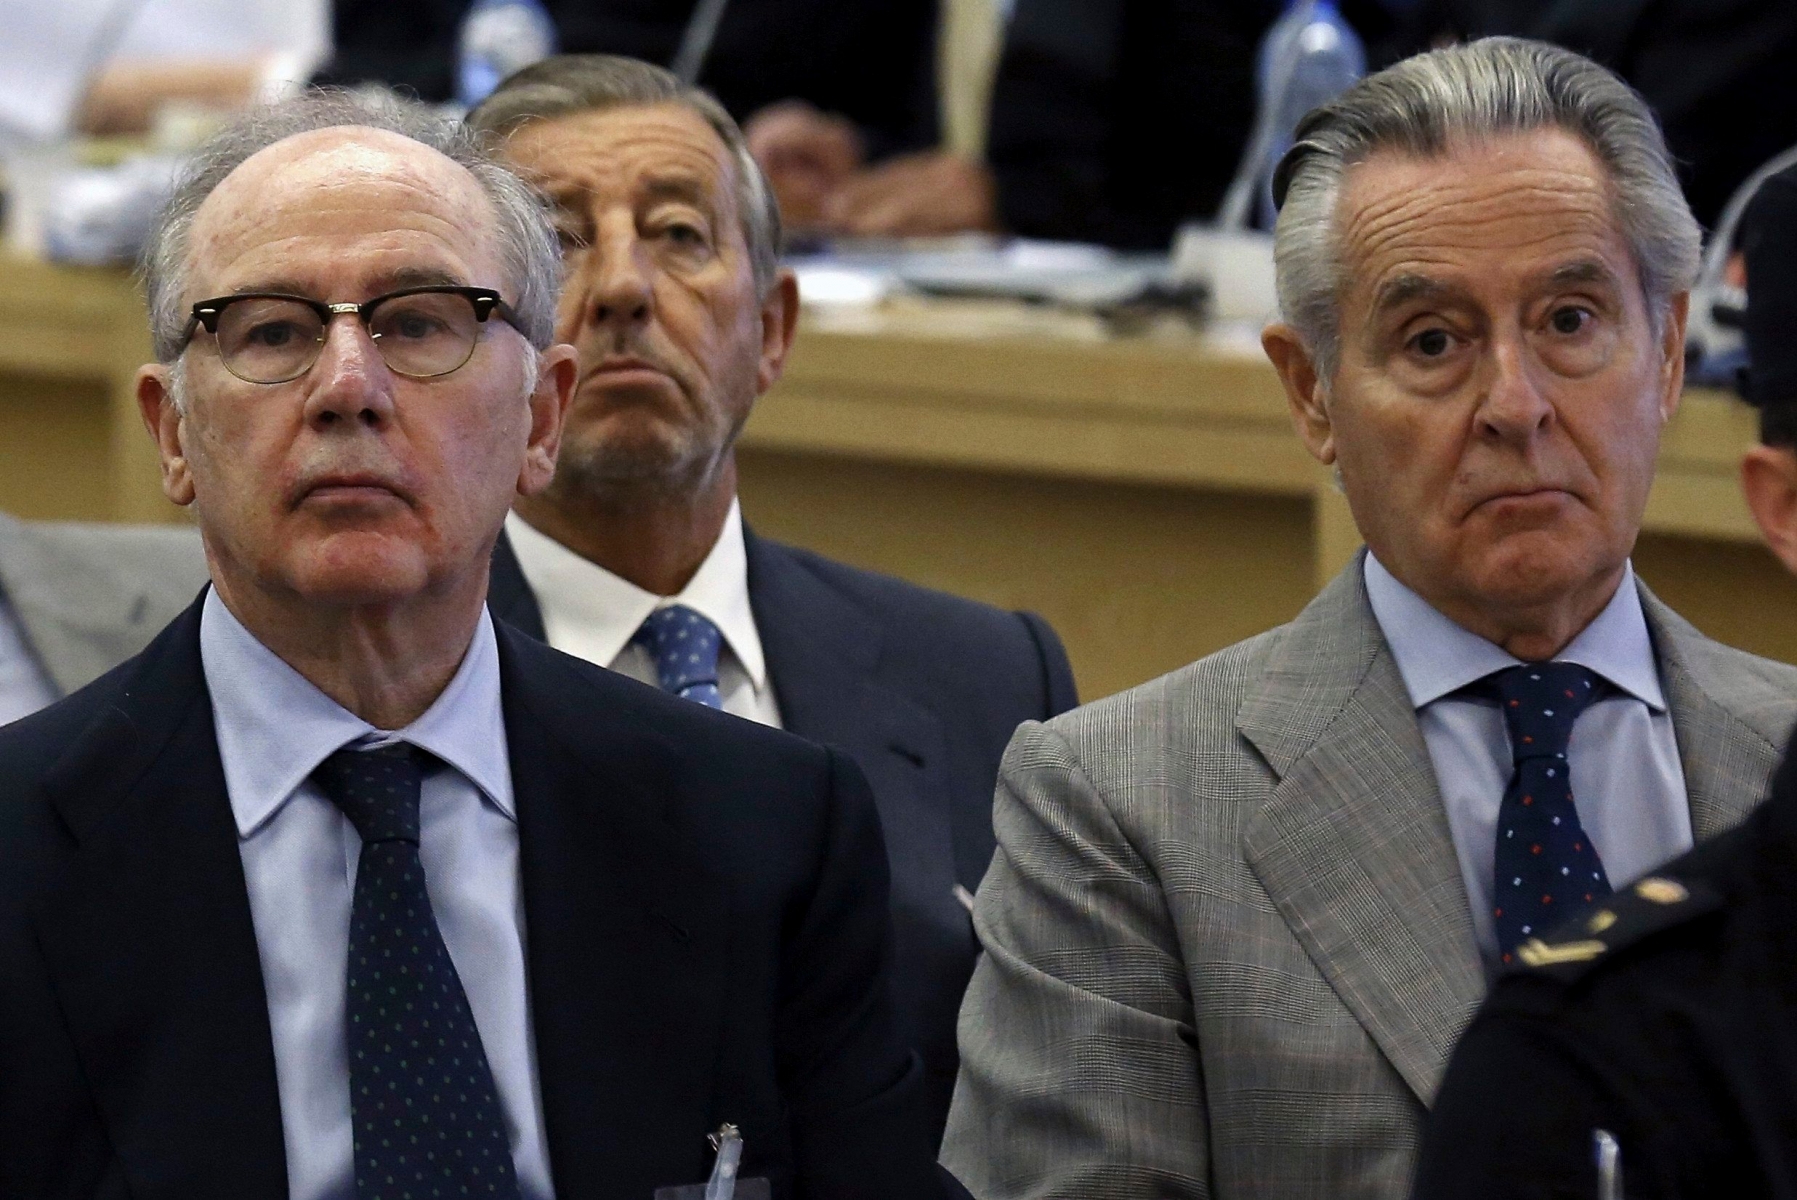 Former Spanish Finance Minister and International Monetary Fund chief Rodrigo Rato, left, sits in court alongside the former president of the Caja Madrid bank, Miguel Blesa at the National Court in Madrid, Monday, Sept. 26, 2016. Rodrigo Rato, and 65 officials at Bankia SA and its founding savings bank Caja Madrid, face trial for alleged misuse of corporate credit cards issued by Spain's Bankia group and its predecessor savings bank, Caja Madrid between 2003 and 2012. (Sergio Barrenechea, Pool Photo via AP) Spain Ex IMF Chief